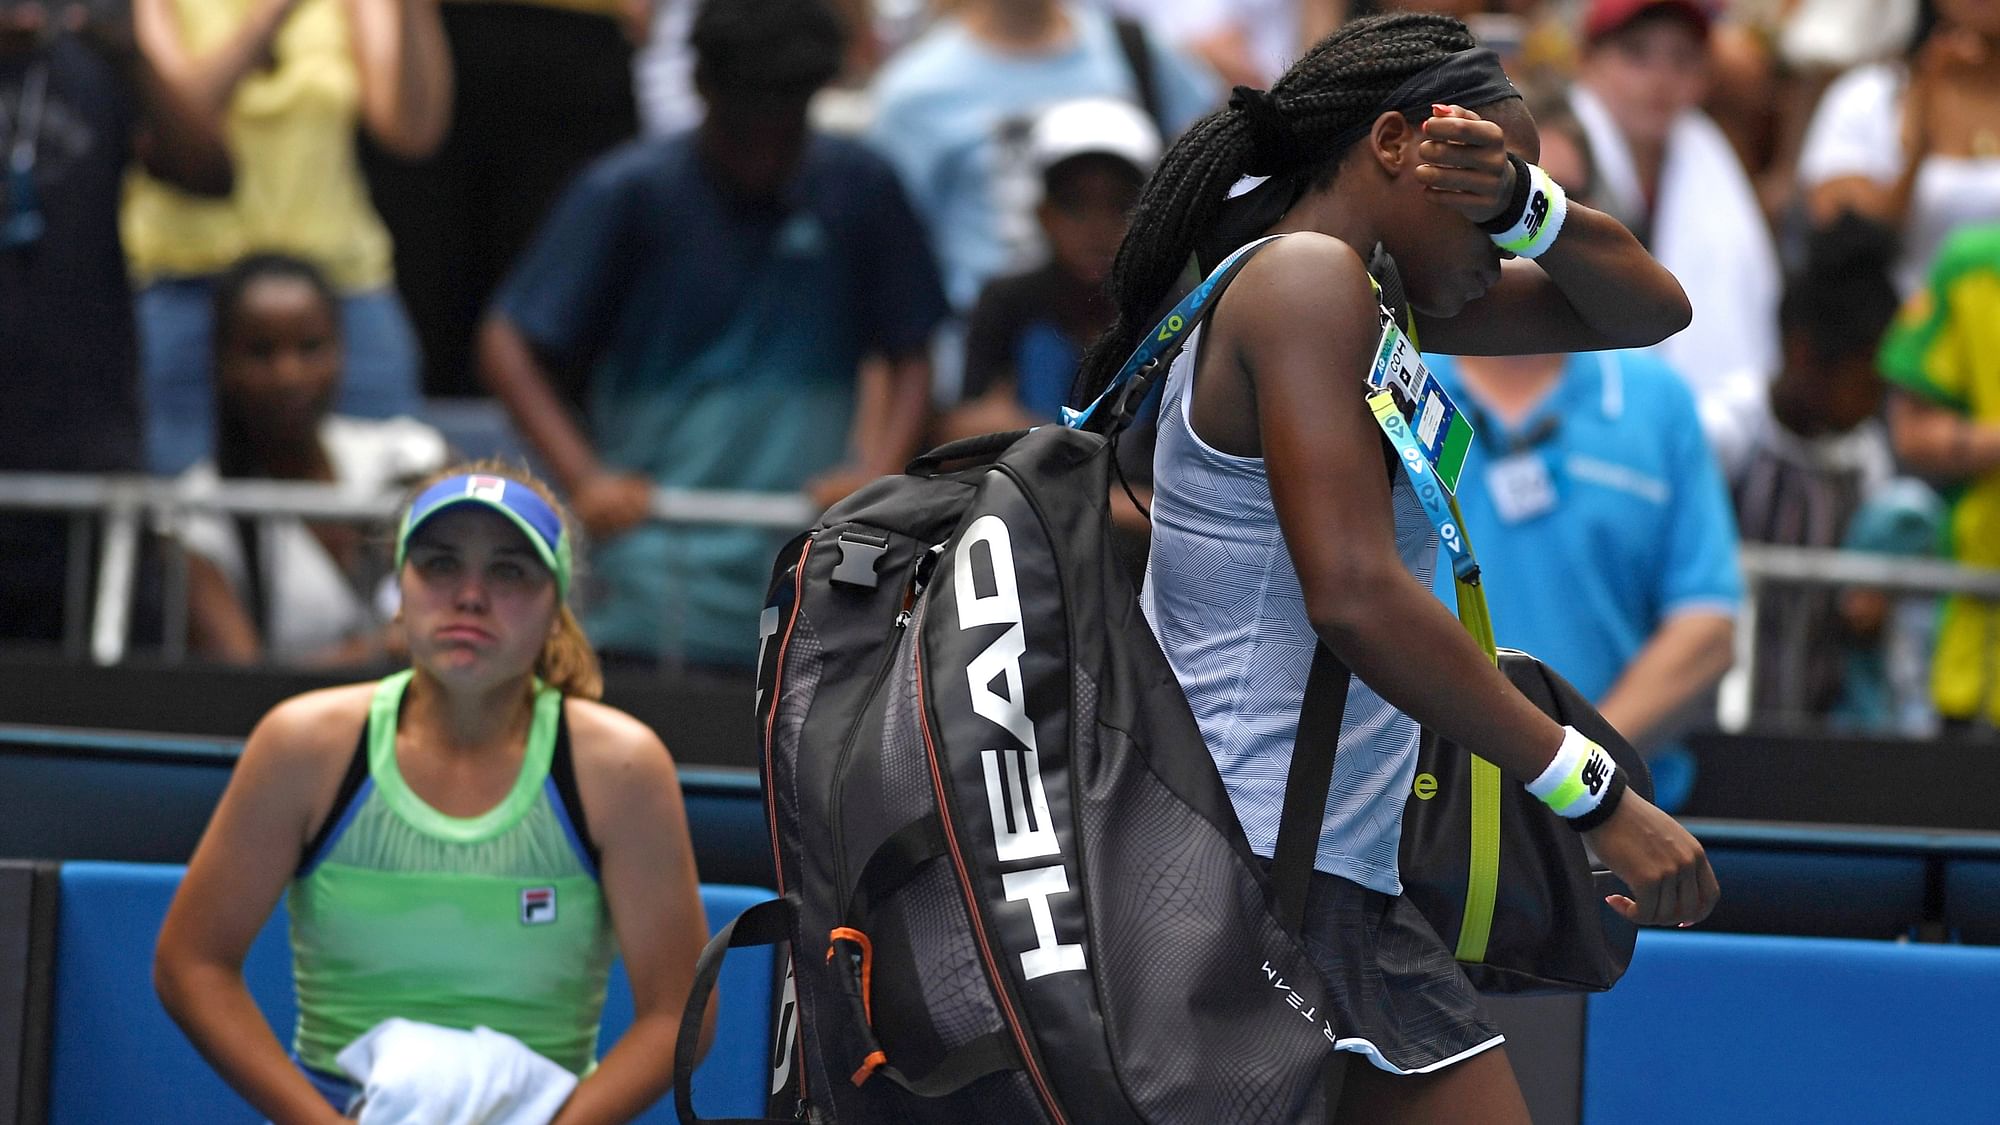 Coco Gauff’s latest history-making Grand Slam run at age 15 ended with a 6-7 (5), 6-3, 6-0 loss in the Australian Open’s fourth round to Sofia Kenin on Sunday, 26 January.